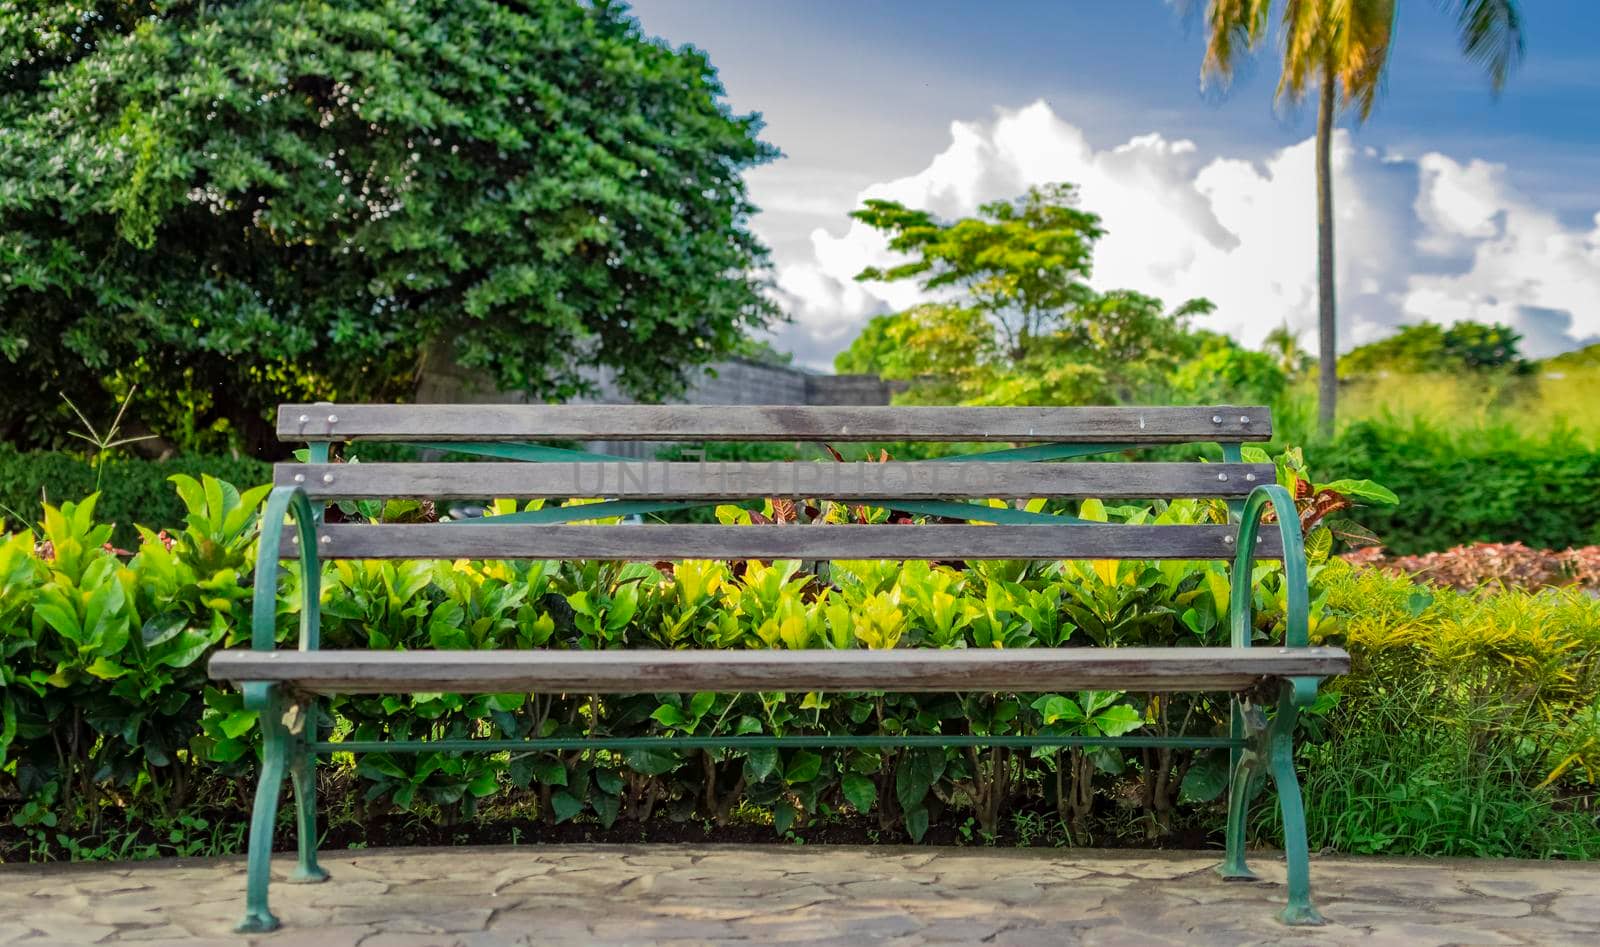 A lonely bench in a park, wooden bench in a park with blue sky, wooden bench in a garden